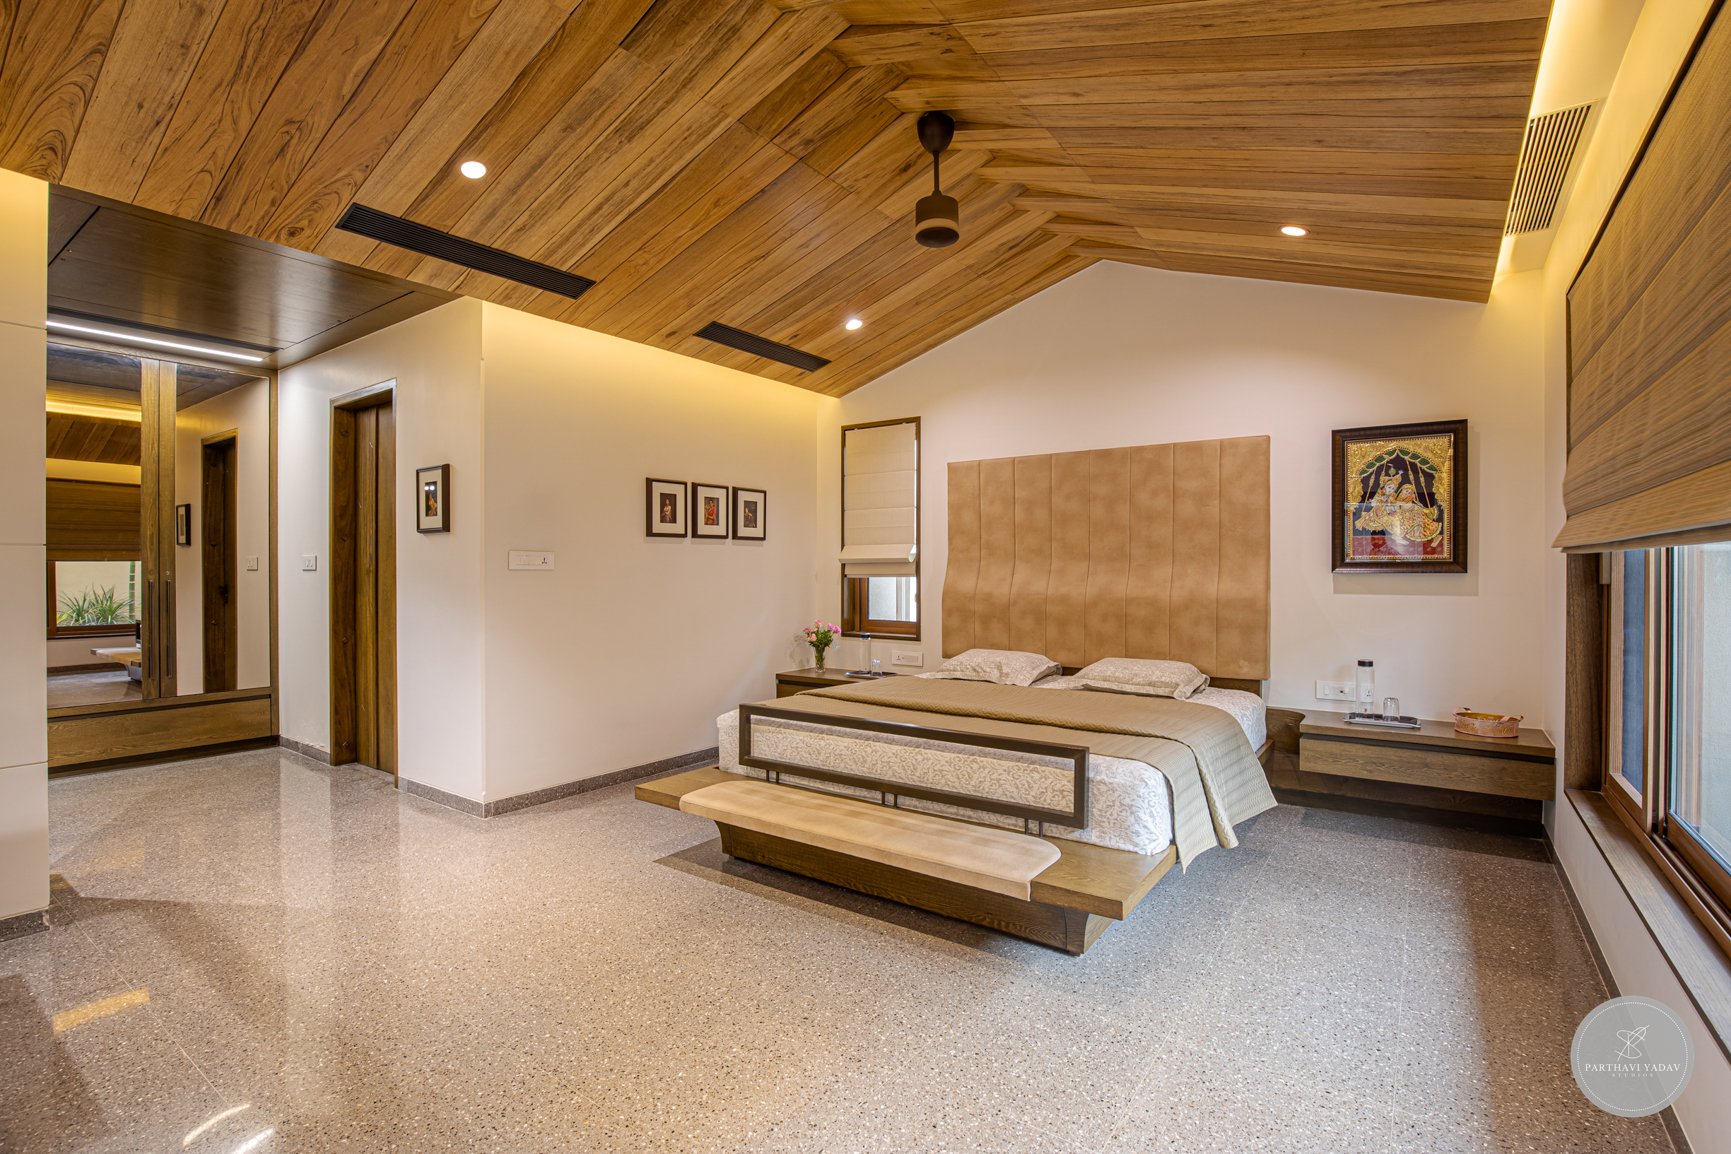 best interior photographer in pune bangalore - master bedroom with leather headrest for a bed with walkin closet and high wooden panel ceiling.jpg